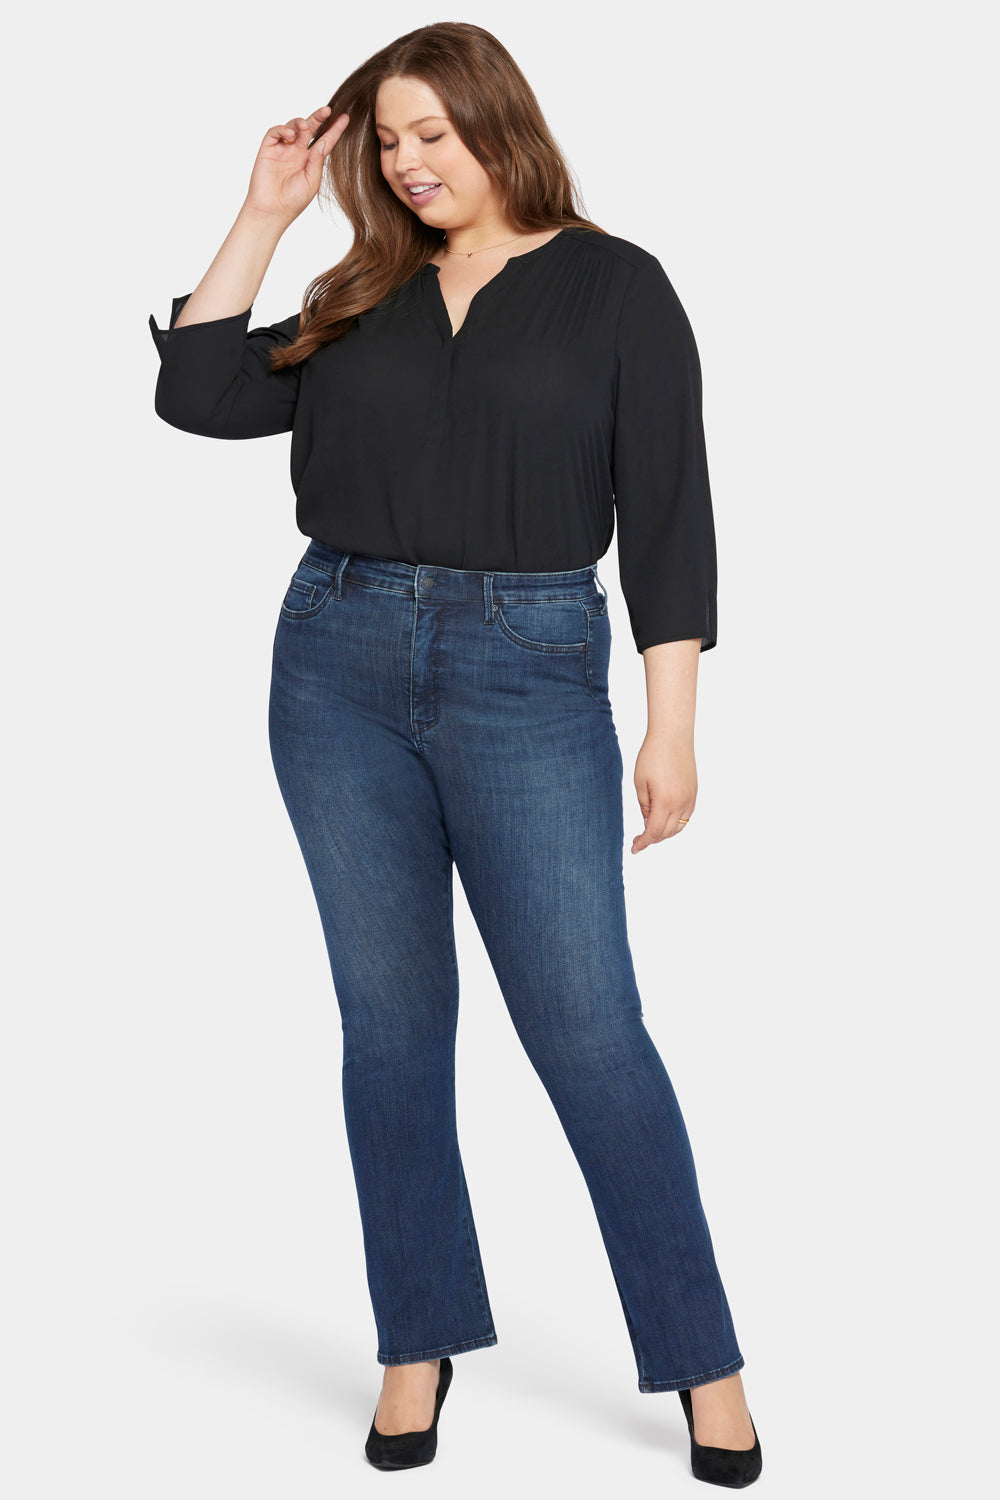 Le Silhouette Slim Bootcut Jeans In Long Inseam Plus Size With High Rise -  Precious Blue